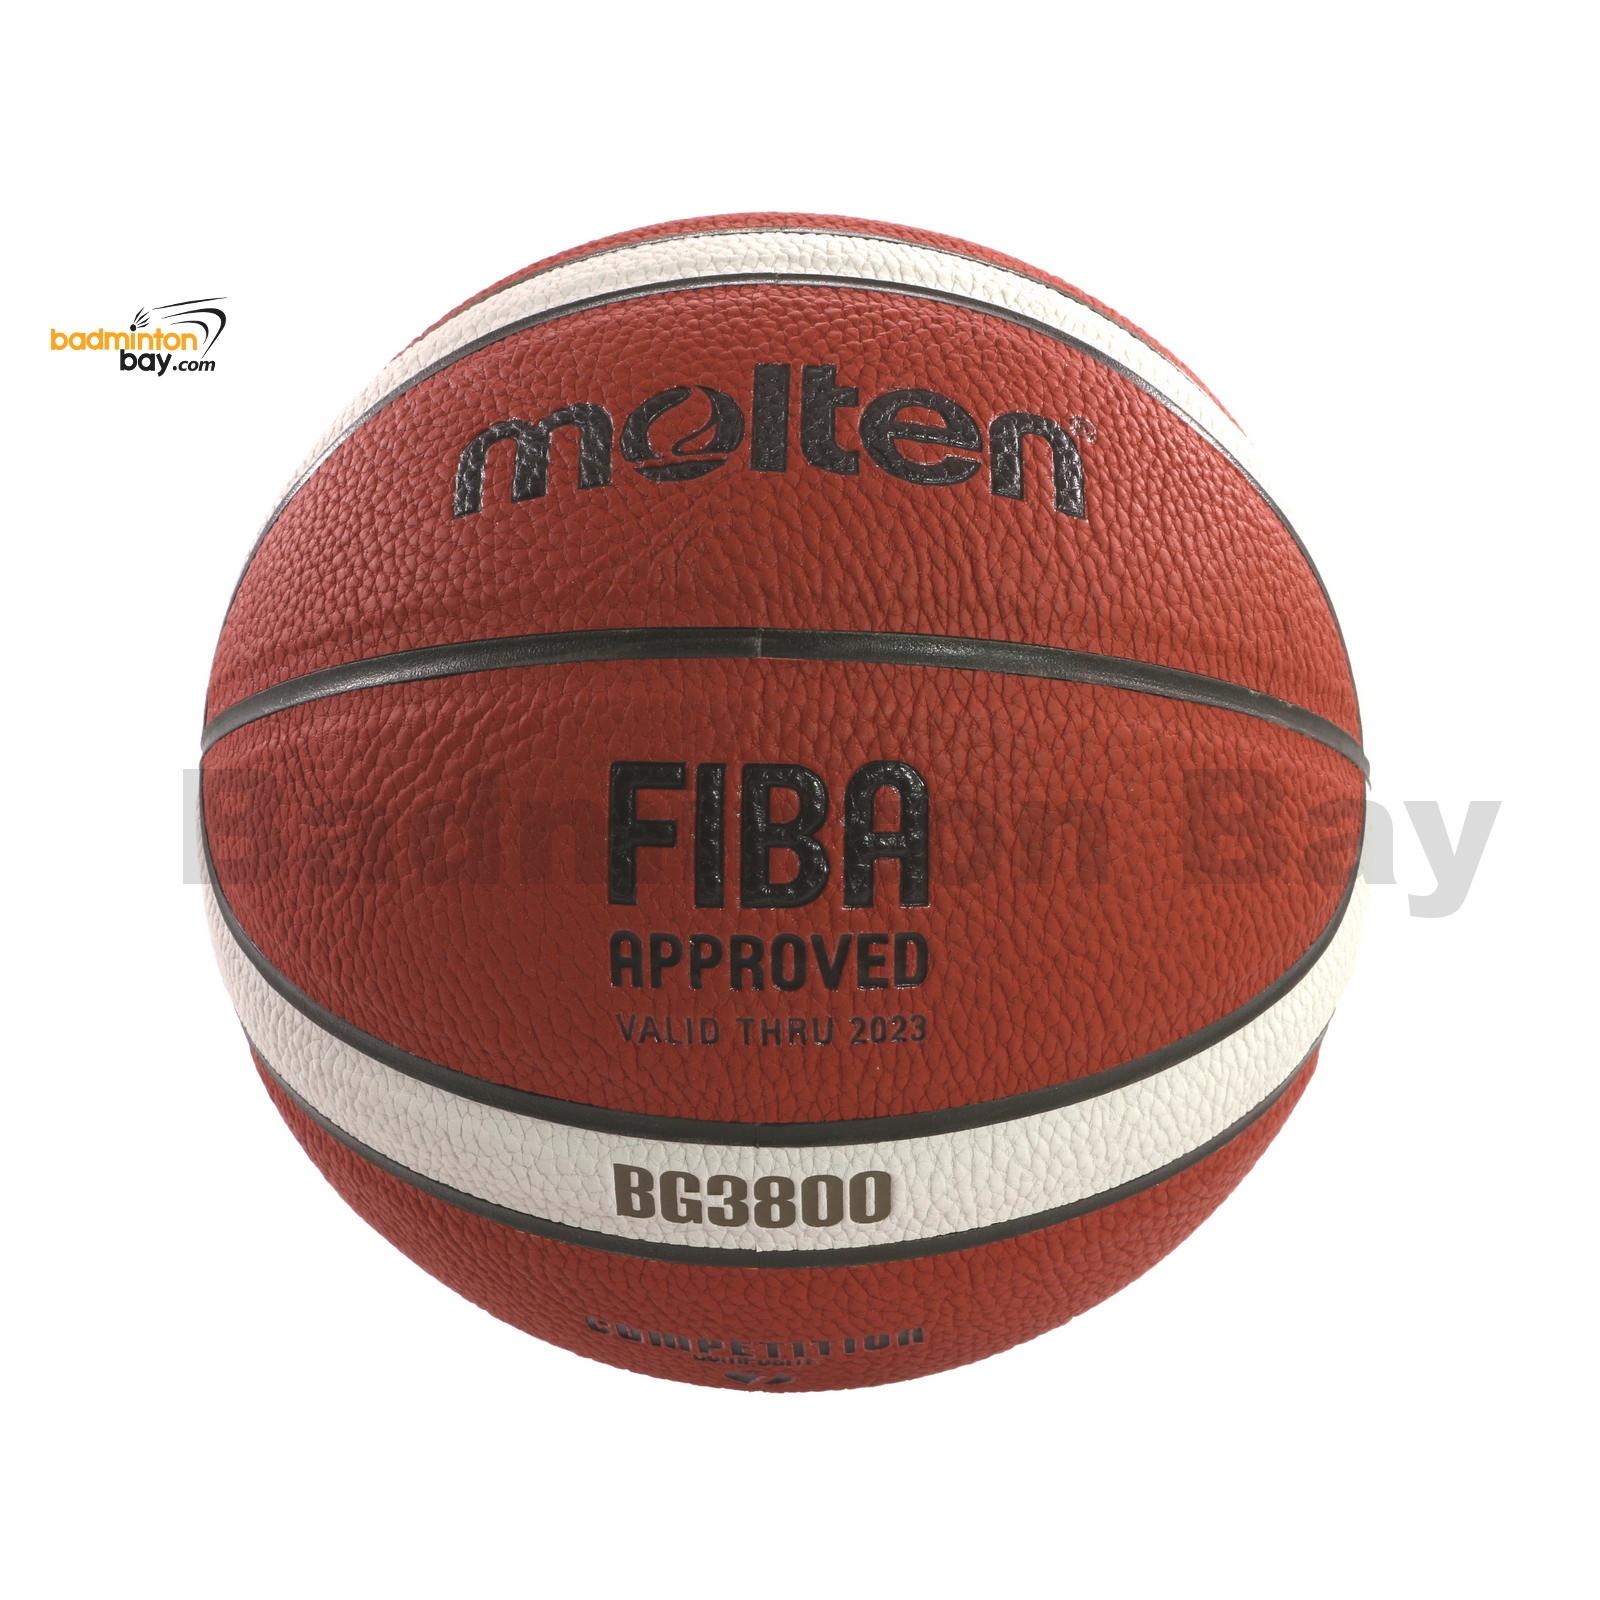 Molten B7G3800 (BG3800 Size 7) Basketball Composite Leather FIBA Approved  Indoor Outdoor